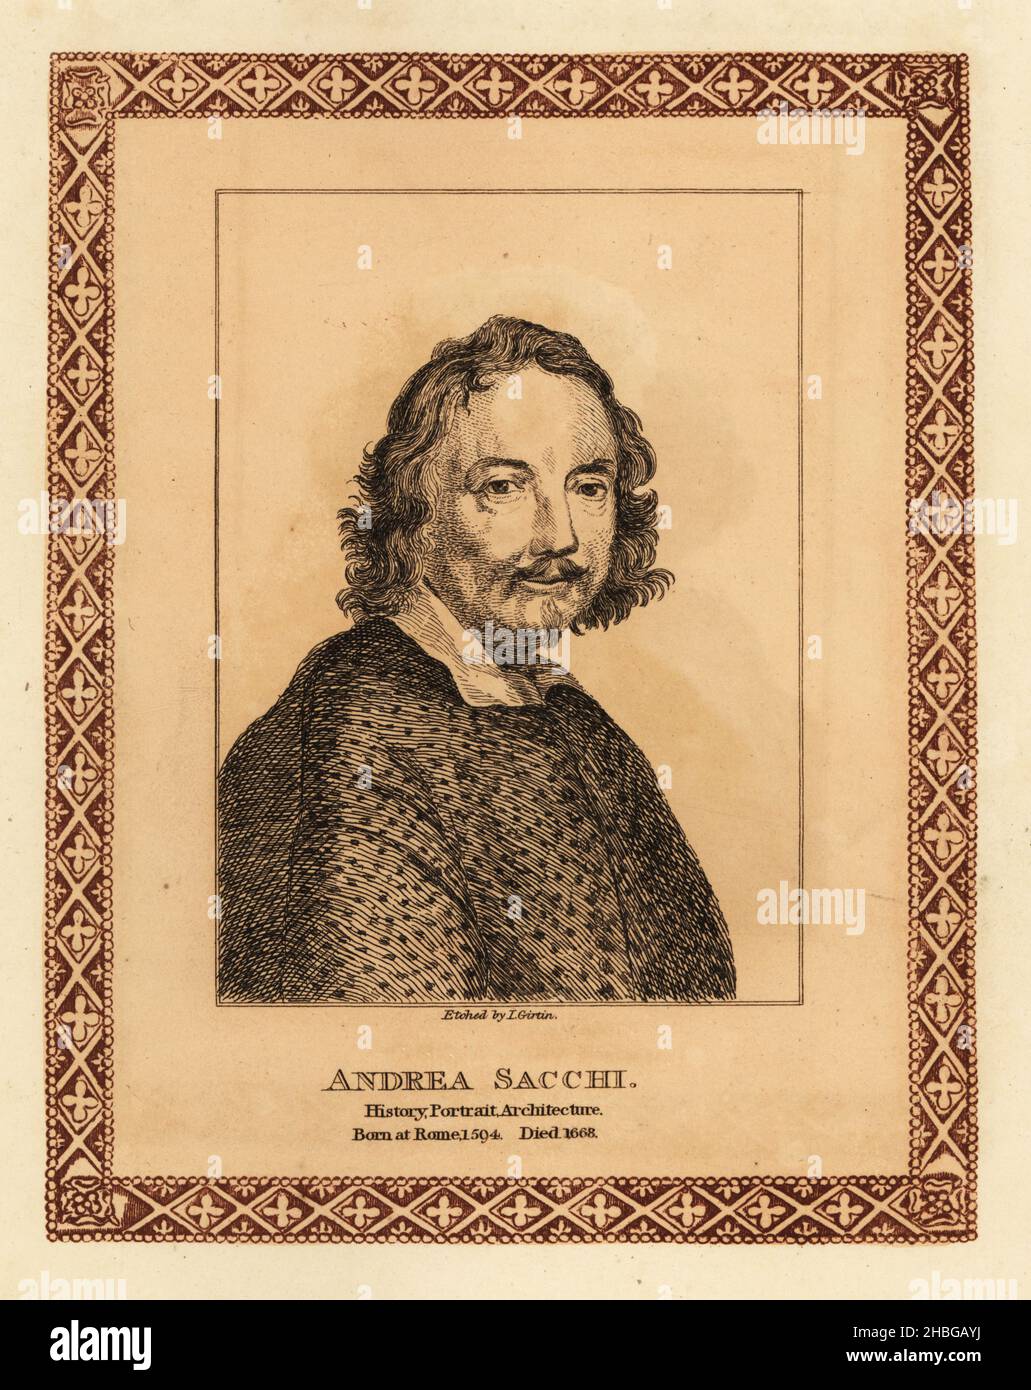 Andrea Sacchi, 1599-1661, Italian painter of High Baroque Classicism, active in Rome. Andrea Sacchi, history, portrait, architecture. Tinted etching within a decorative border by John Girtin after a portrait by Carlo Maratta from John Girtin’s Seventy-Five Portraits of Celebrated Painters from Authentic Originals, J. M’Creery, London, 1817. Stock Photo